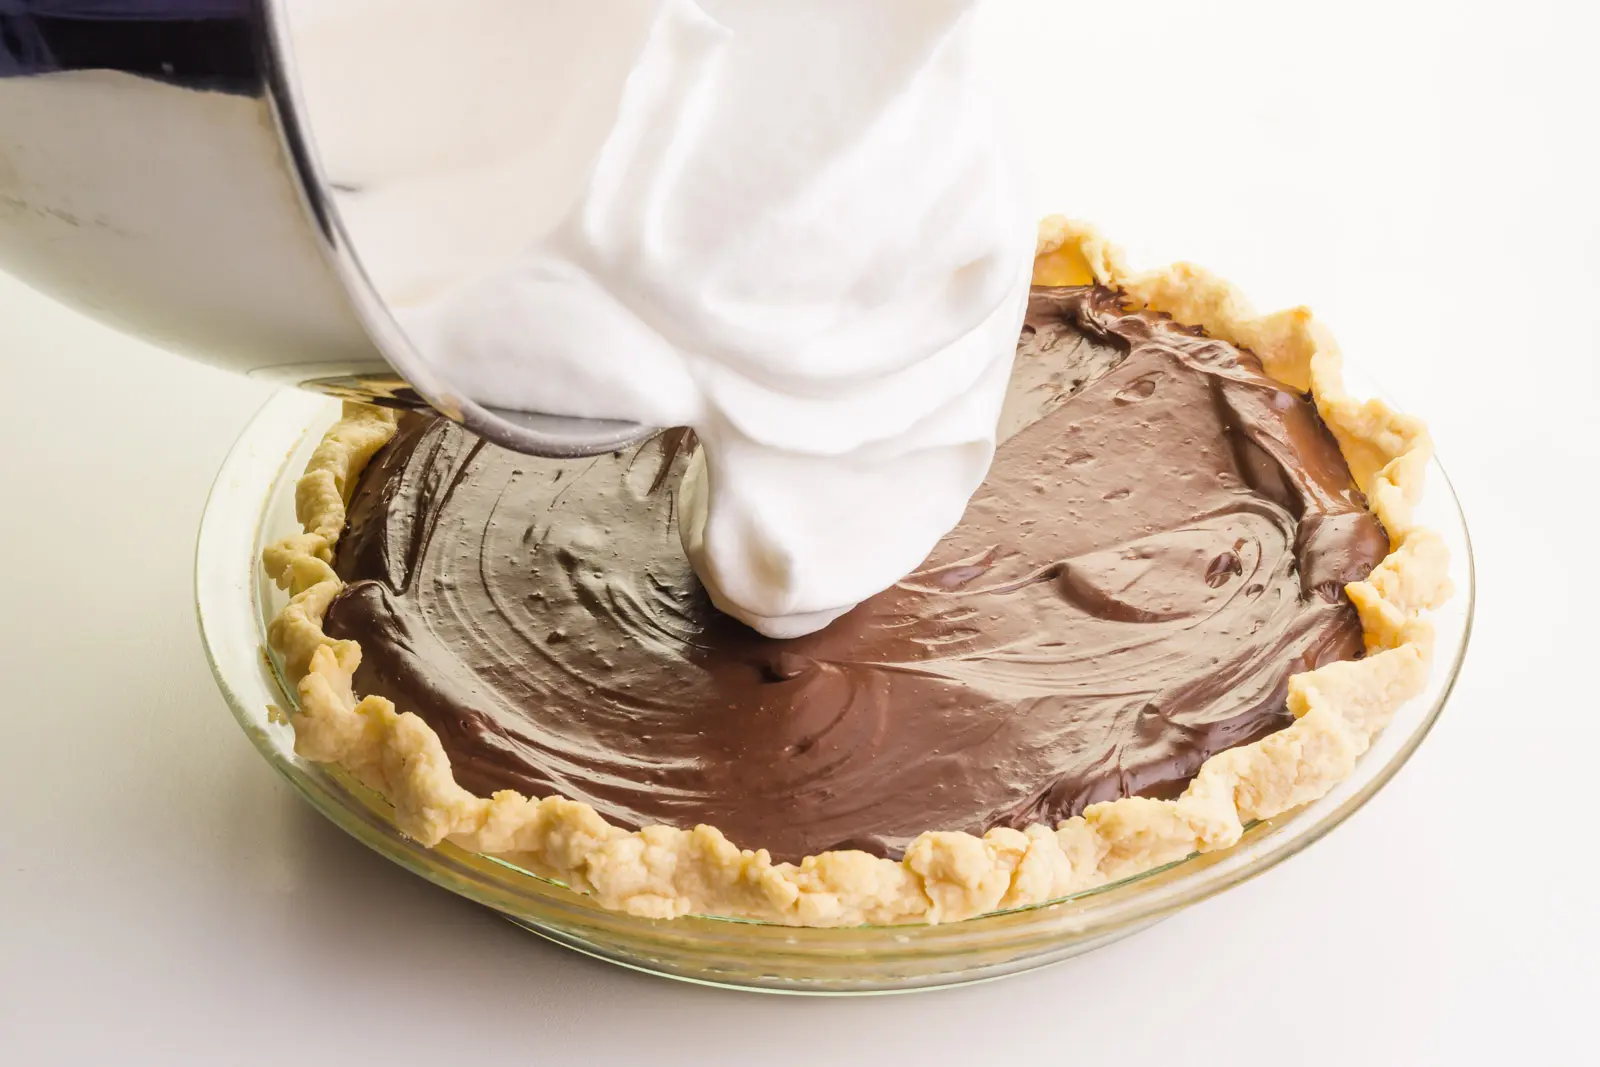 Vegan meringue is being poured from a mixing bowl onto a chocolate pie.